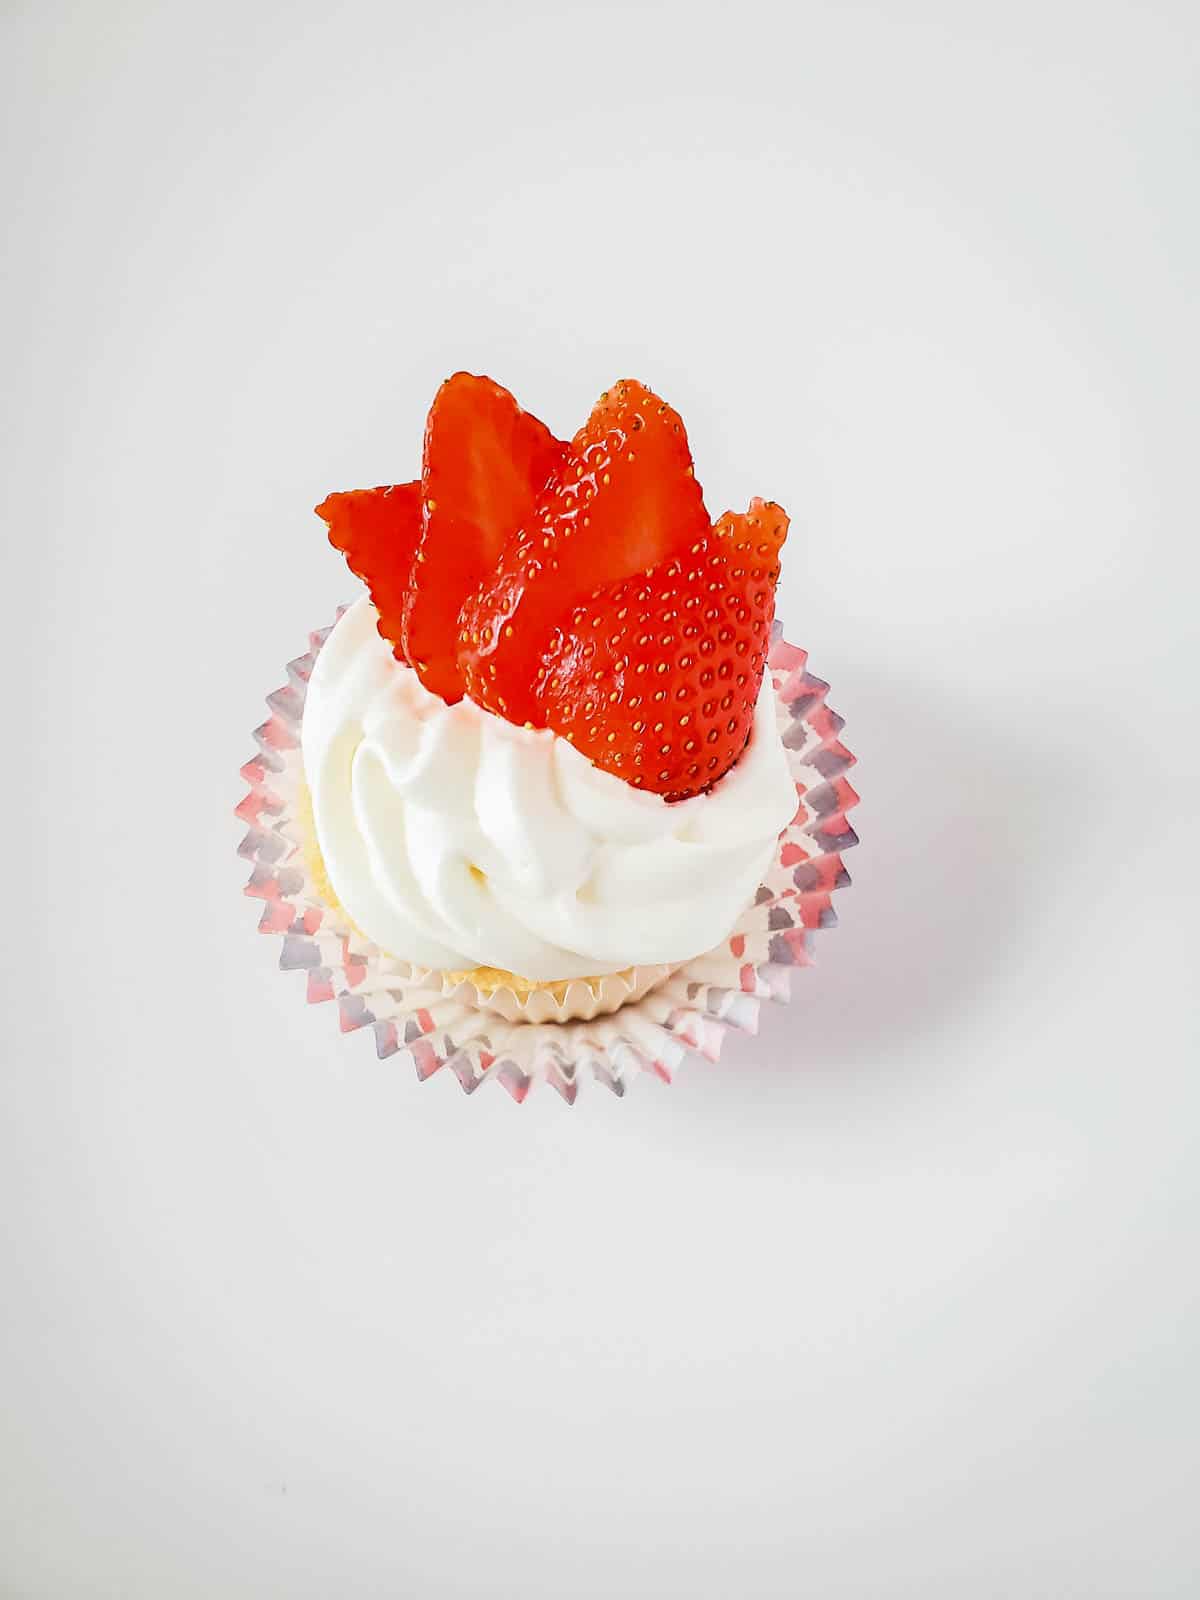 A white frosted cupcake on a table topped with sliced strawberries.